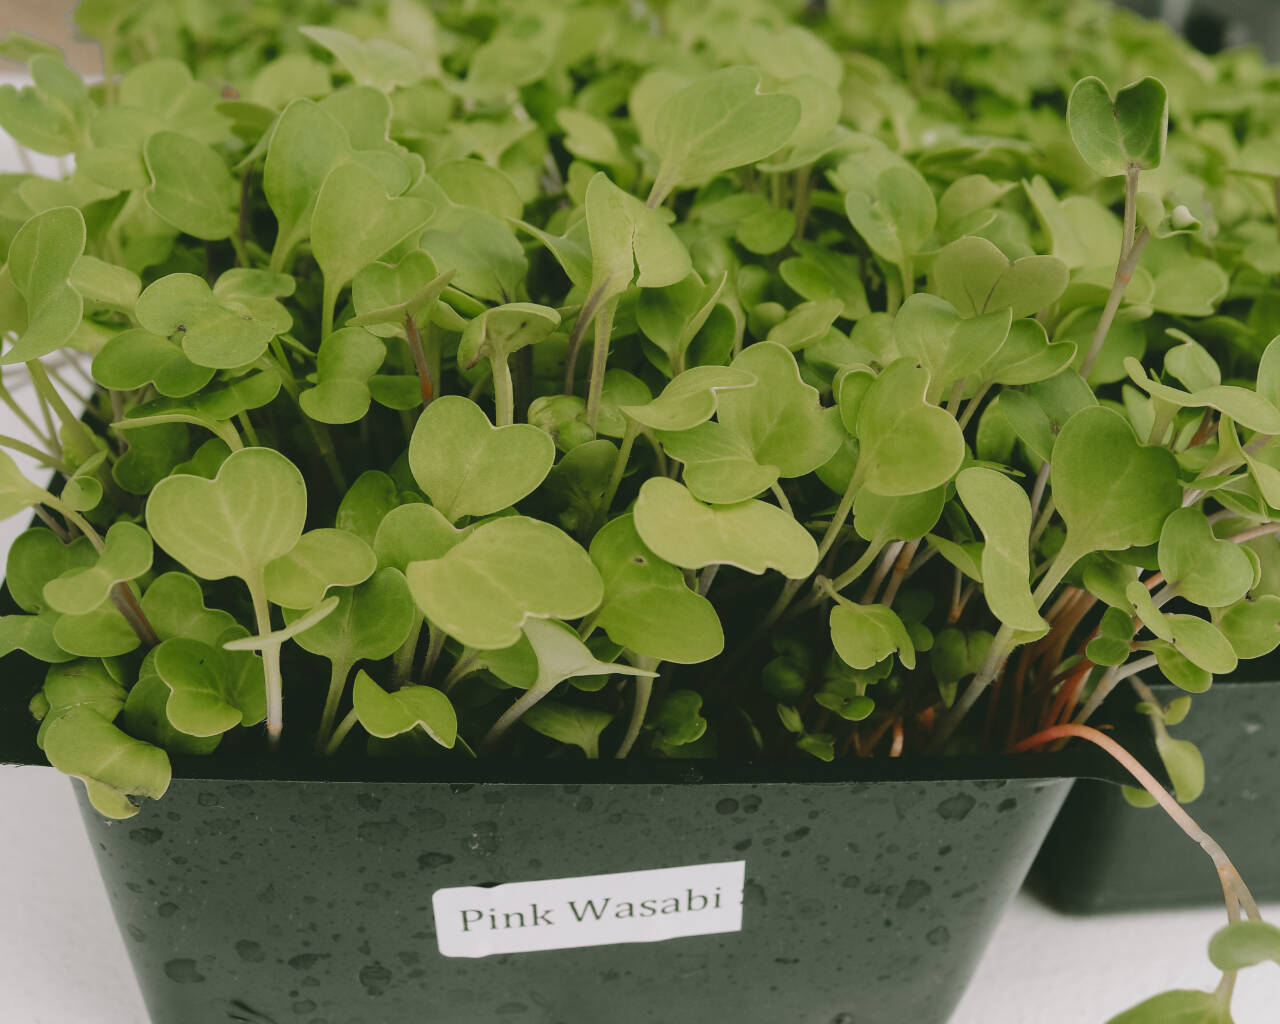 Photo courtesy of Sequim Farmers & Artisans Market (SFAM) / A close-up look at the beautiful pink wasabi microgreens, crisp and full of spicy flavor notes, available at Wilson’s booth at the farmers market.